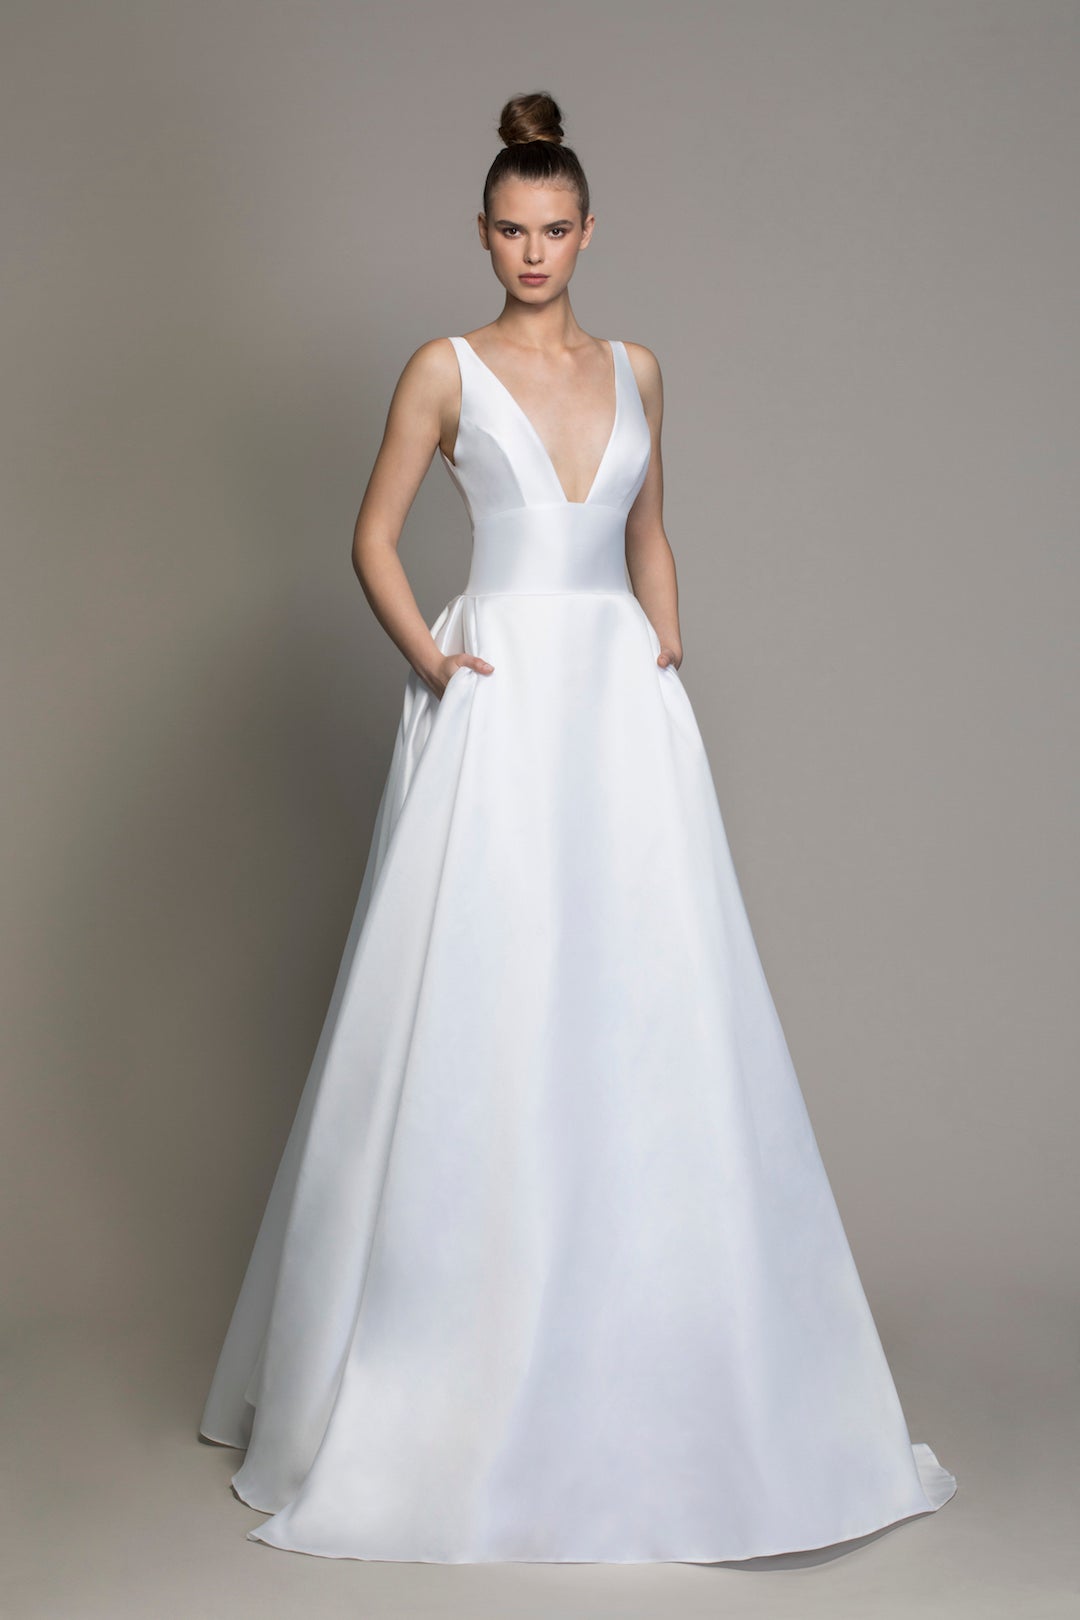 Pnina Tornai's new LOVE 2020 Collection is out! This is style 14761